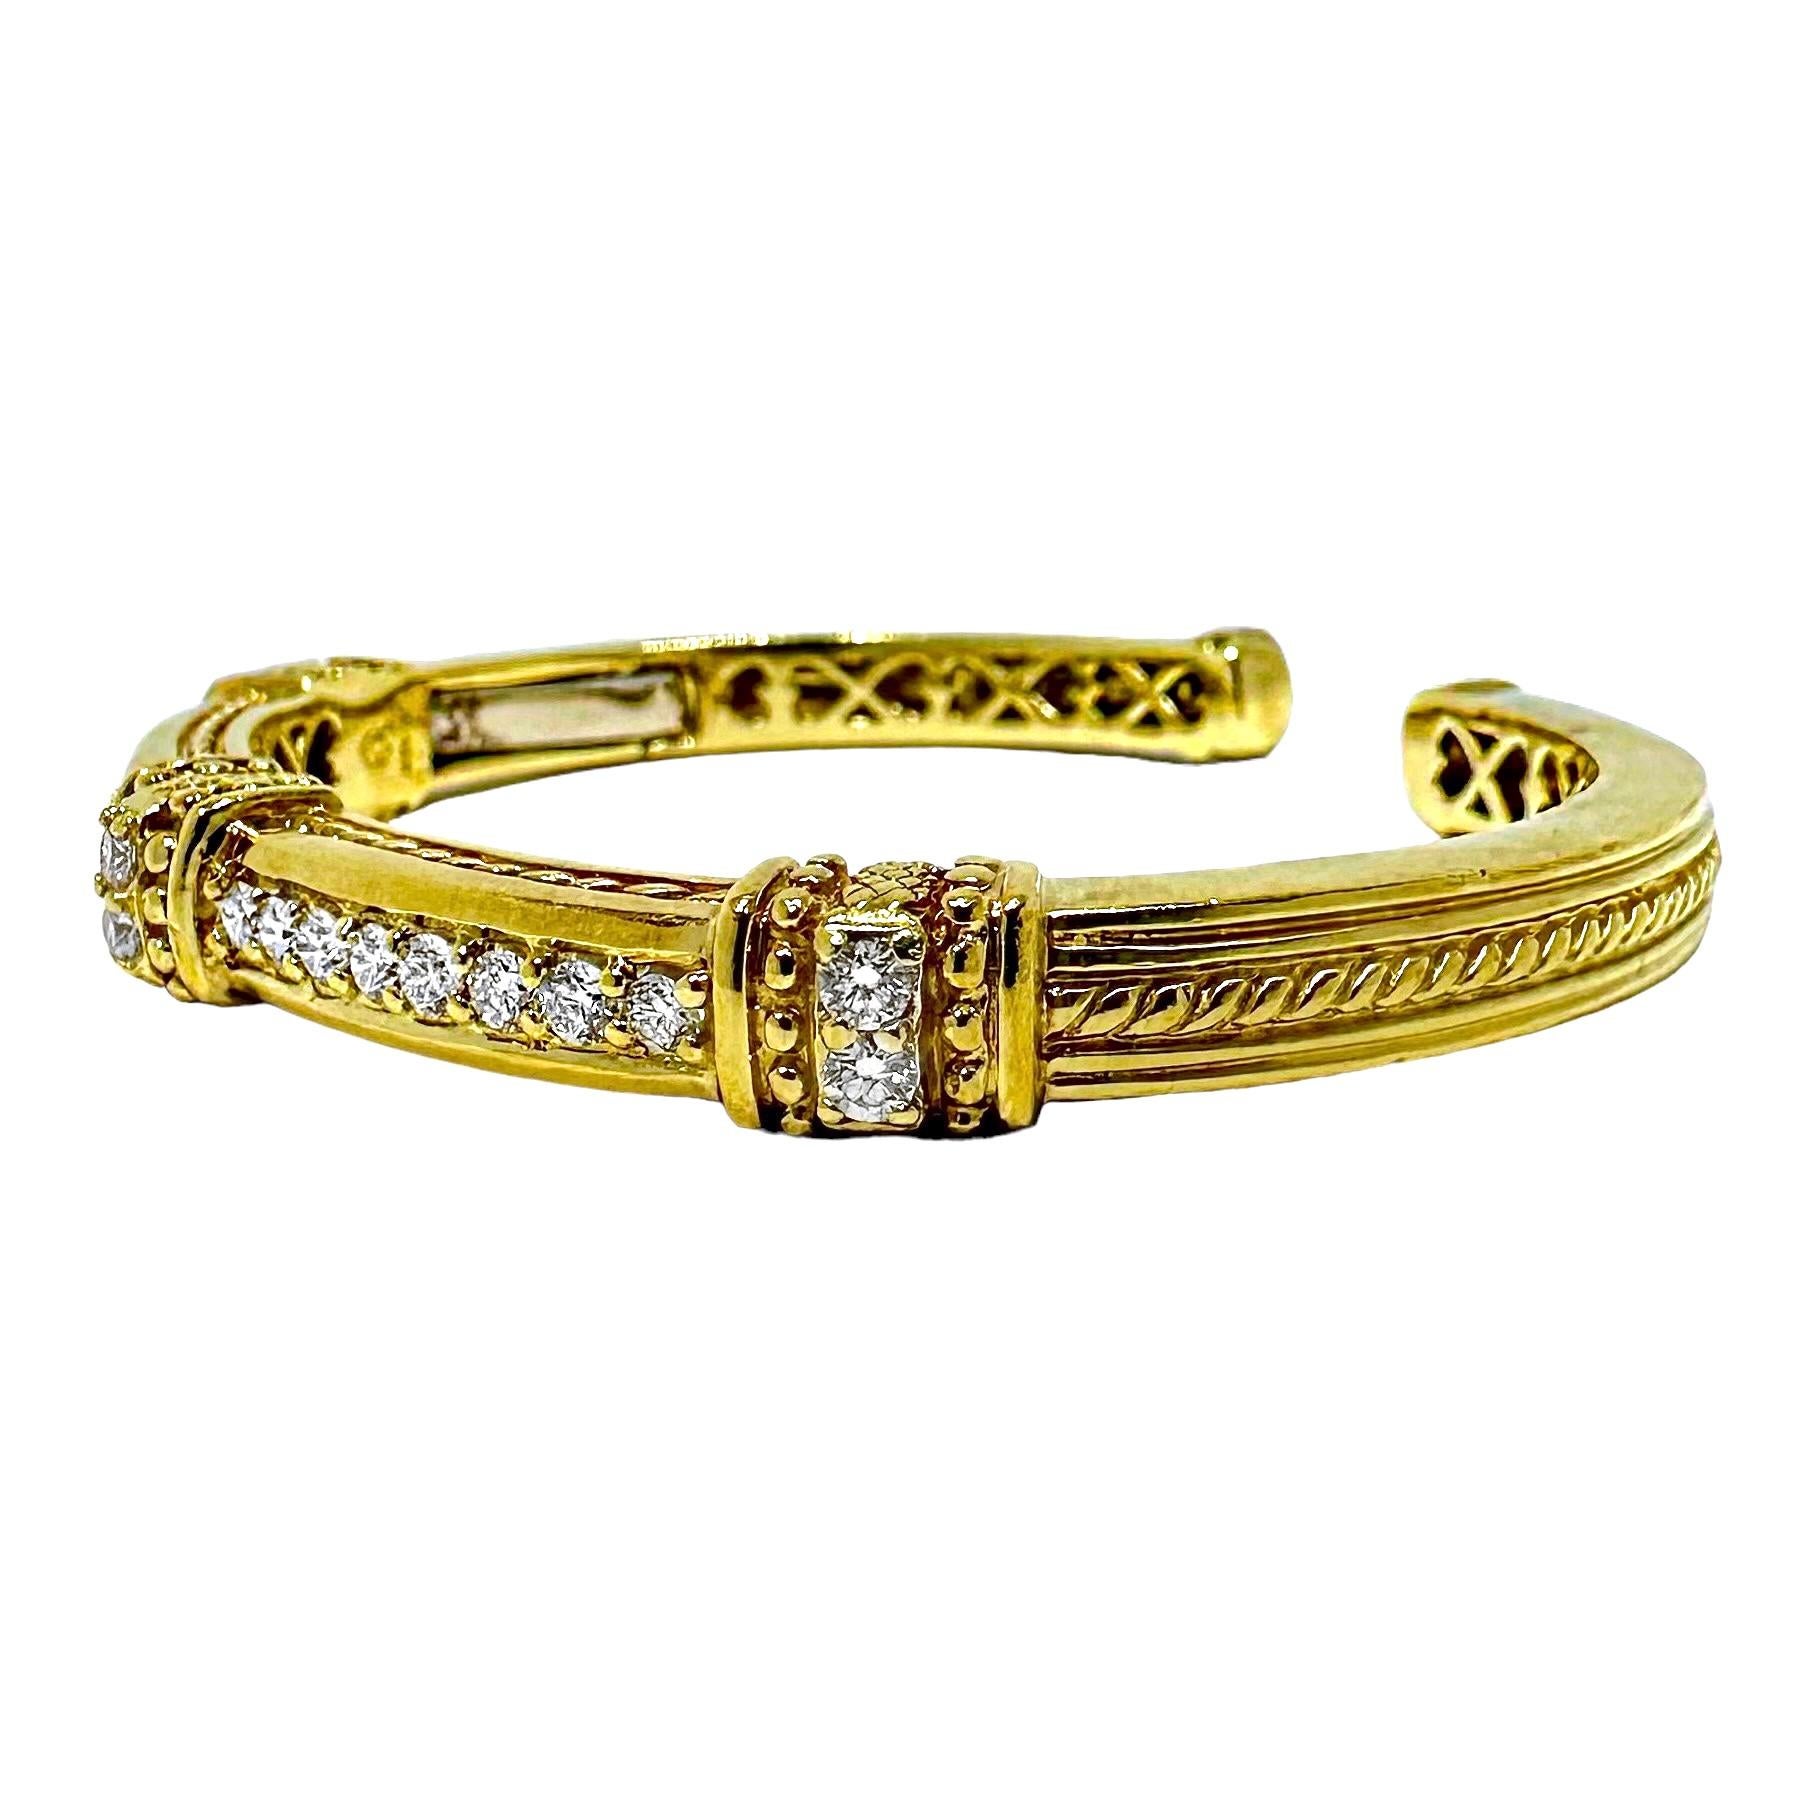 Vintage Judith Ripka Gold and Diamond Bangle Bracelet In Good Condition For Sale In Palm Beach, FL